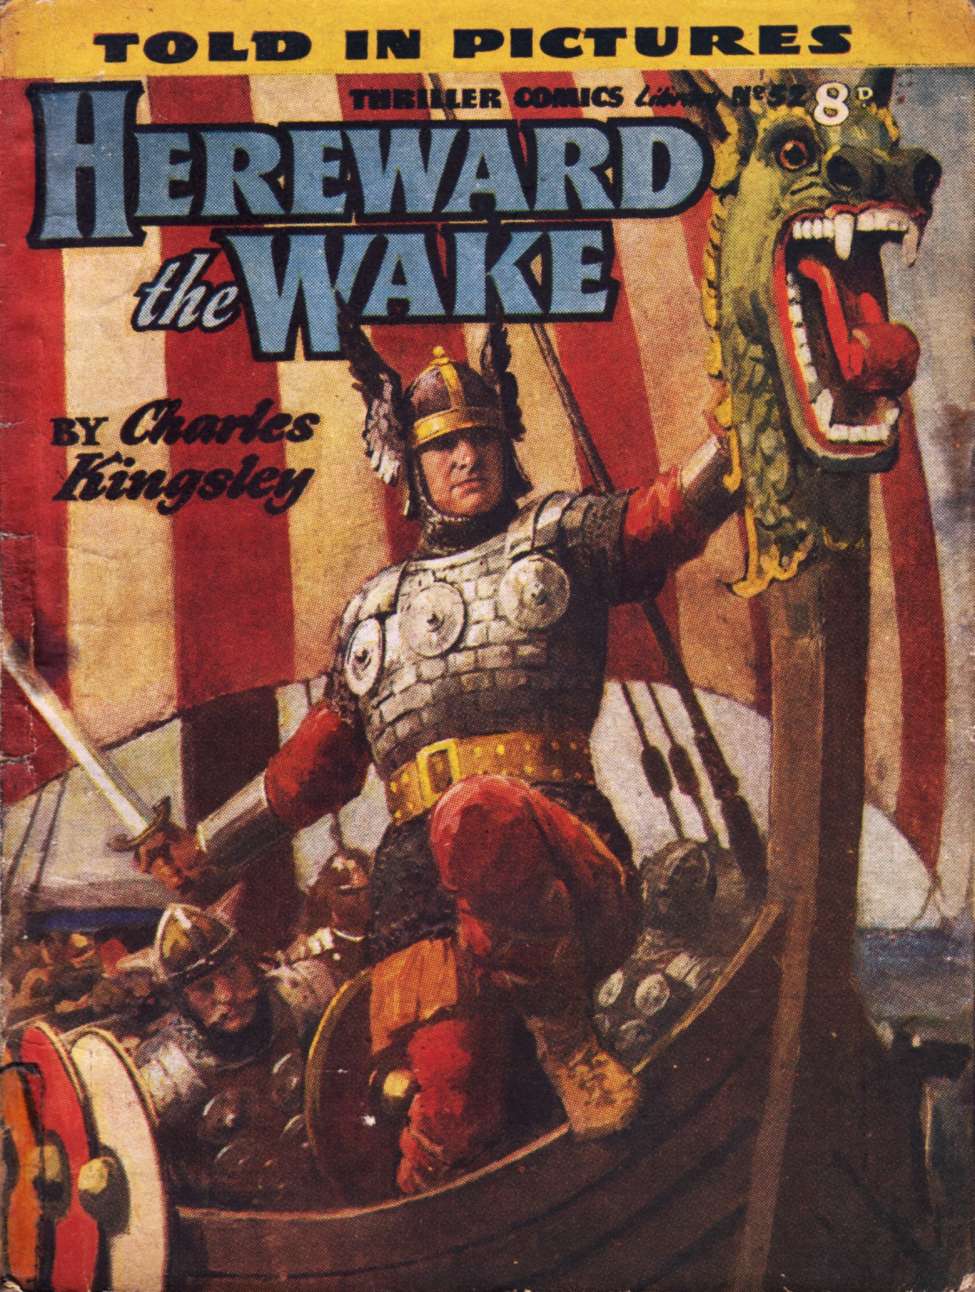 Book Cover For Thriller Comics Library 52 - Hereward the Wake